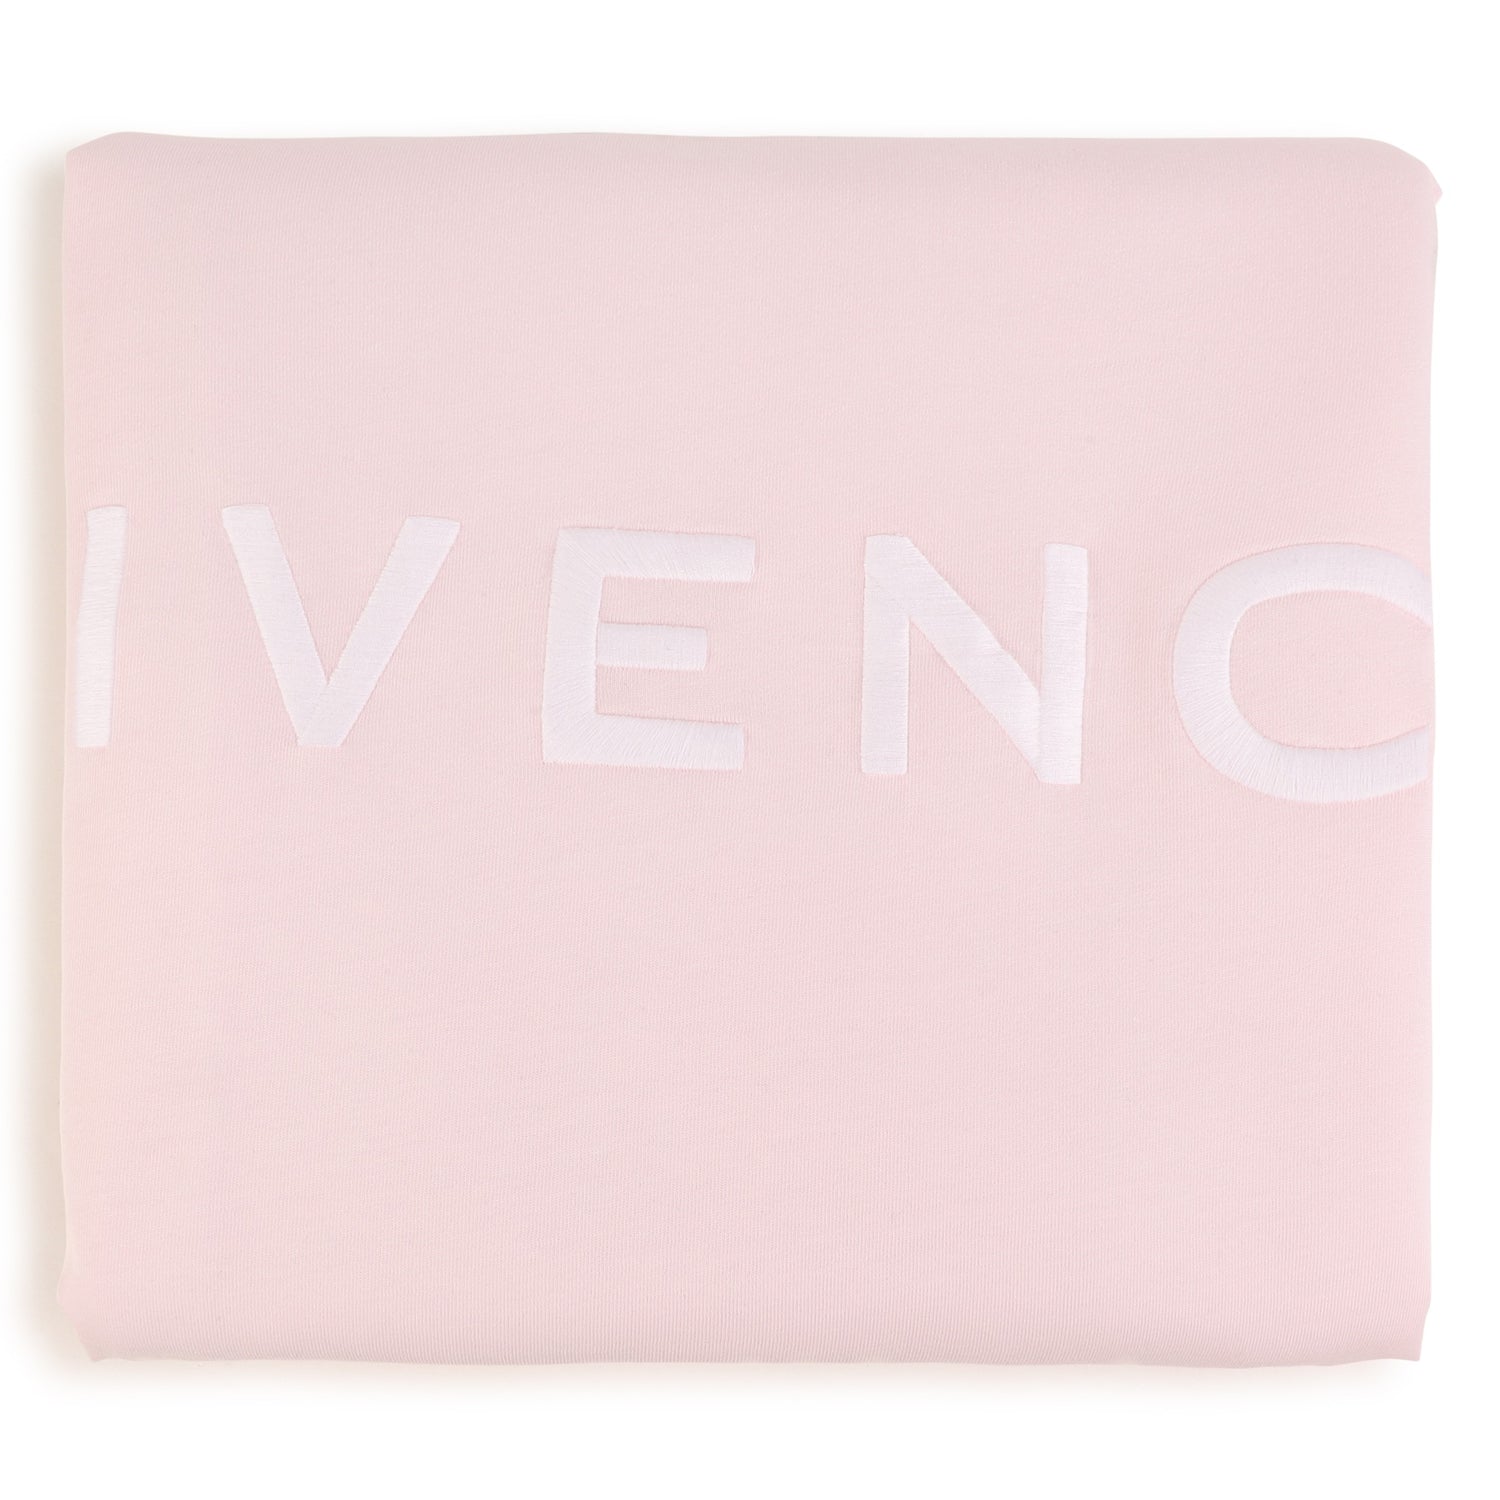 Givenchy Blanket Style: H90163